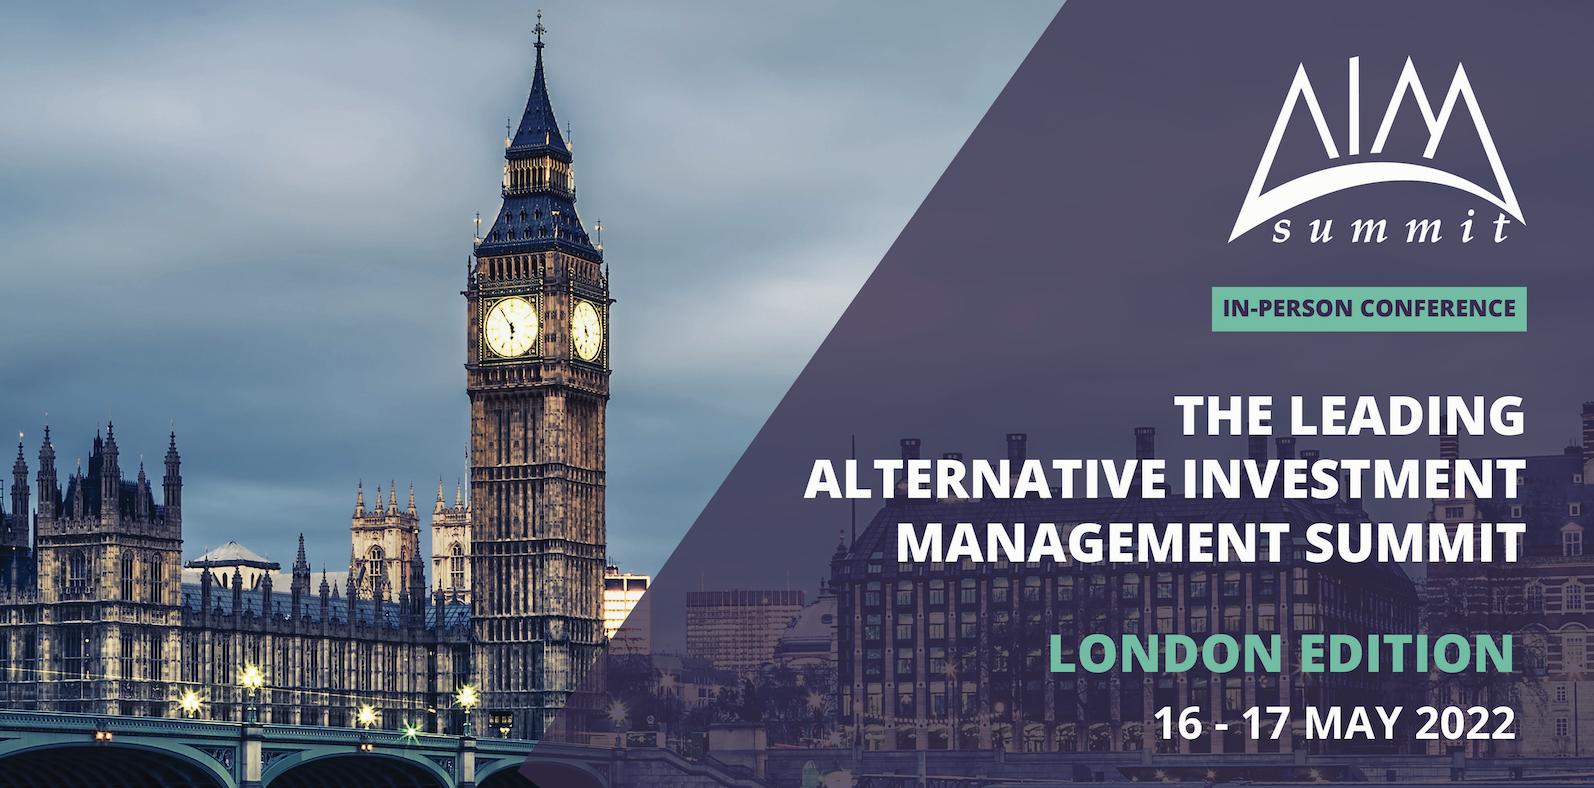 The Leading Alternative Investment Management Summit – London Edition 2022